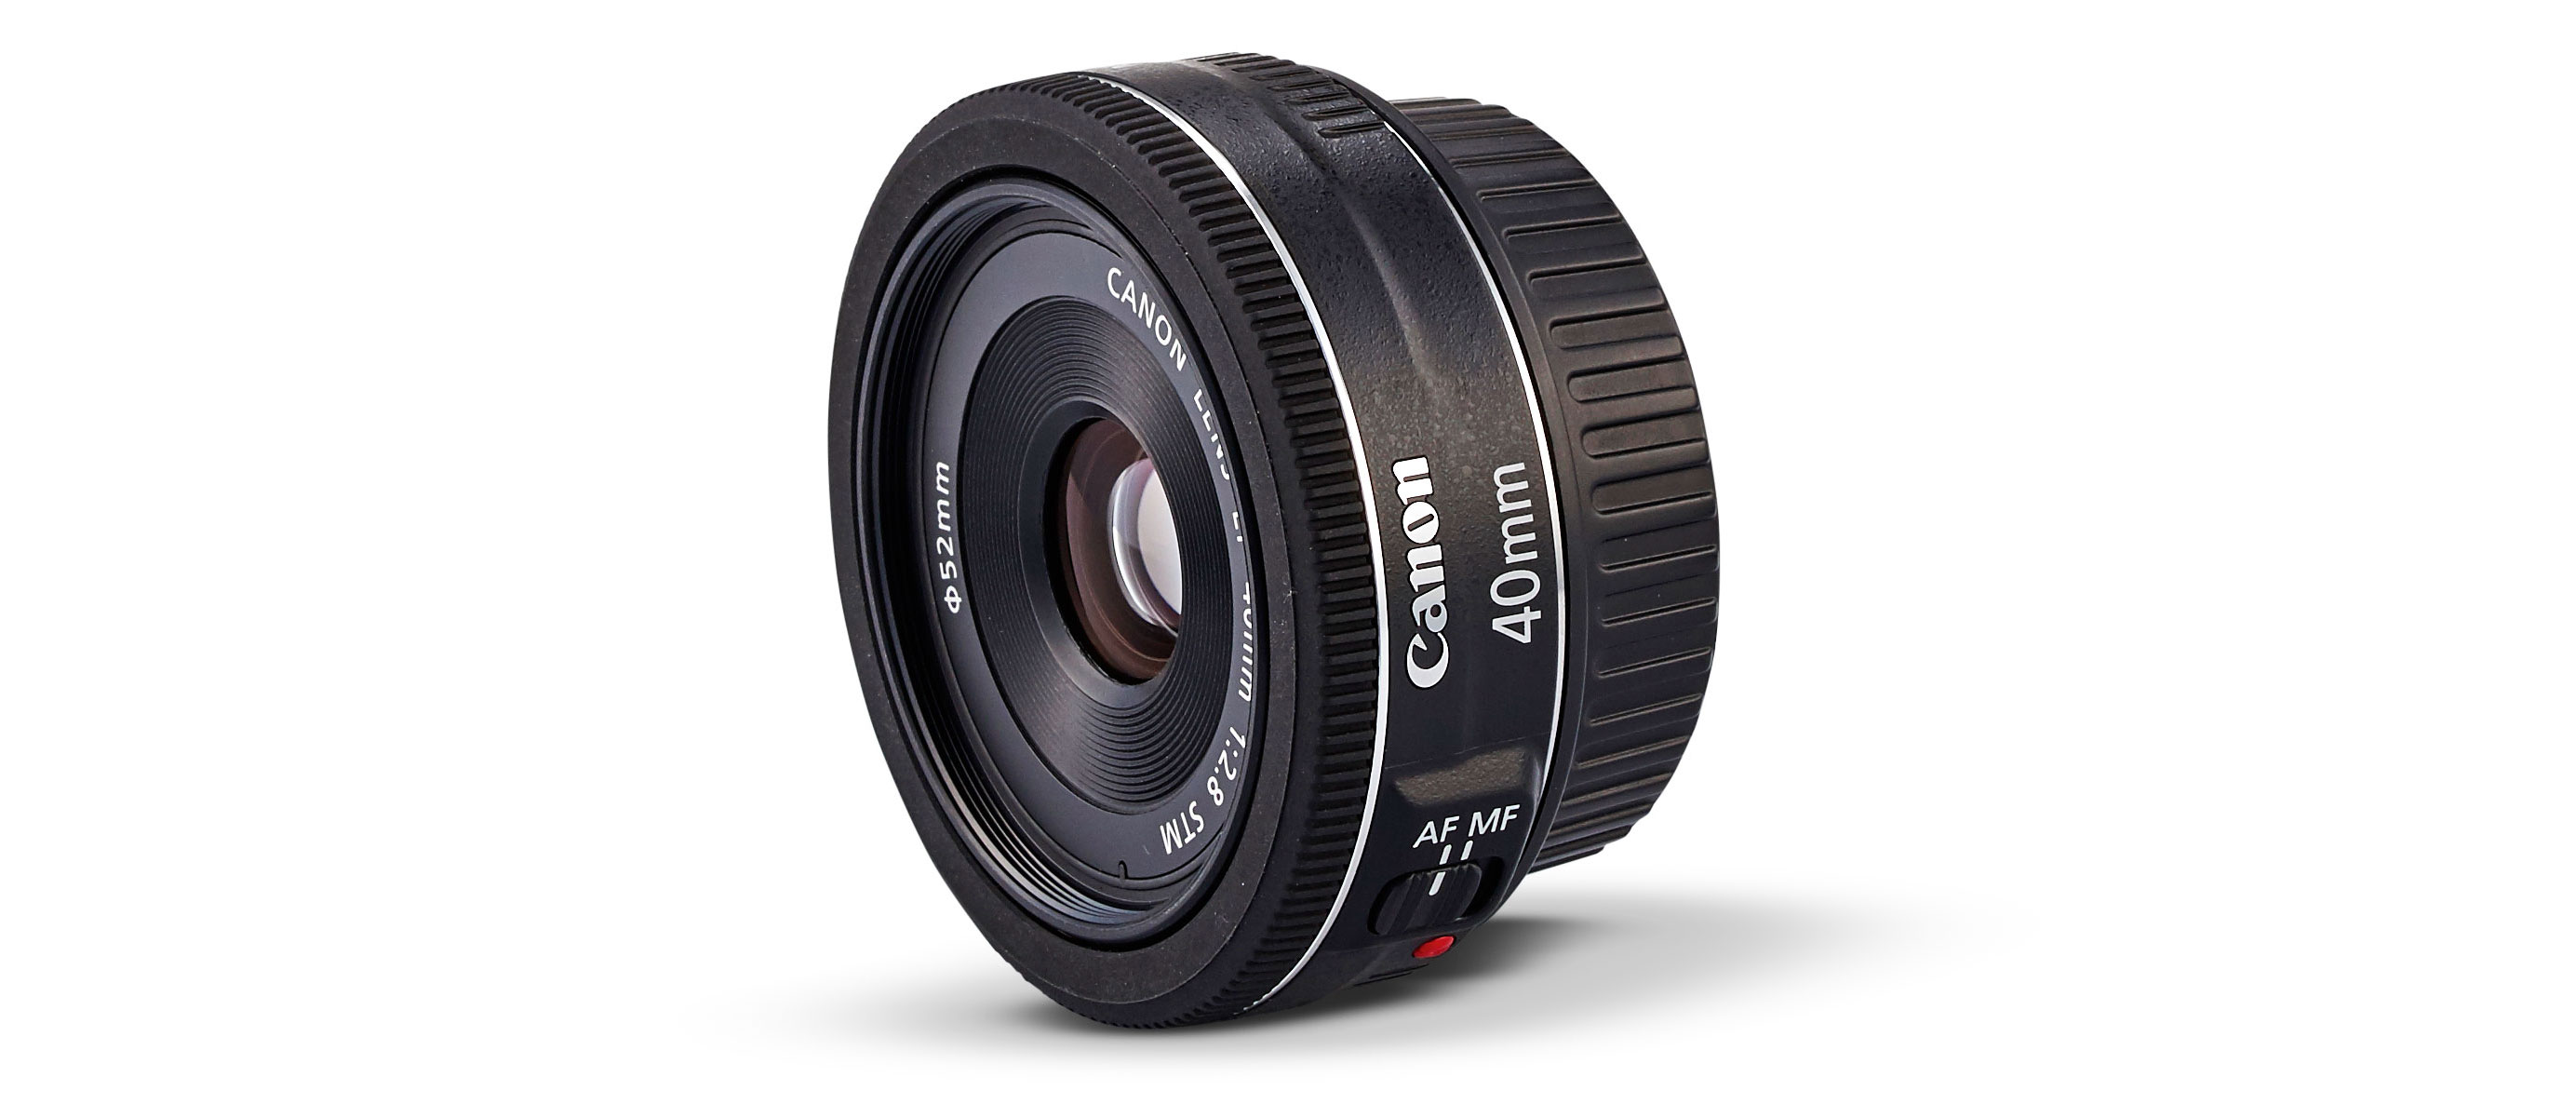 Объектив canon efs. Canon EF 40mm f/2.8 STM. Canon EF-S 24mm f/2.8 STM. Canon EF-S 24mm 2.8 STM. Canon EF 24mm STM.